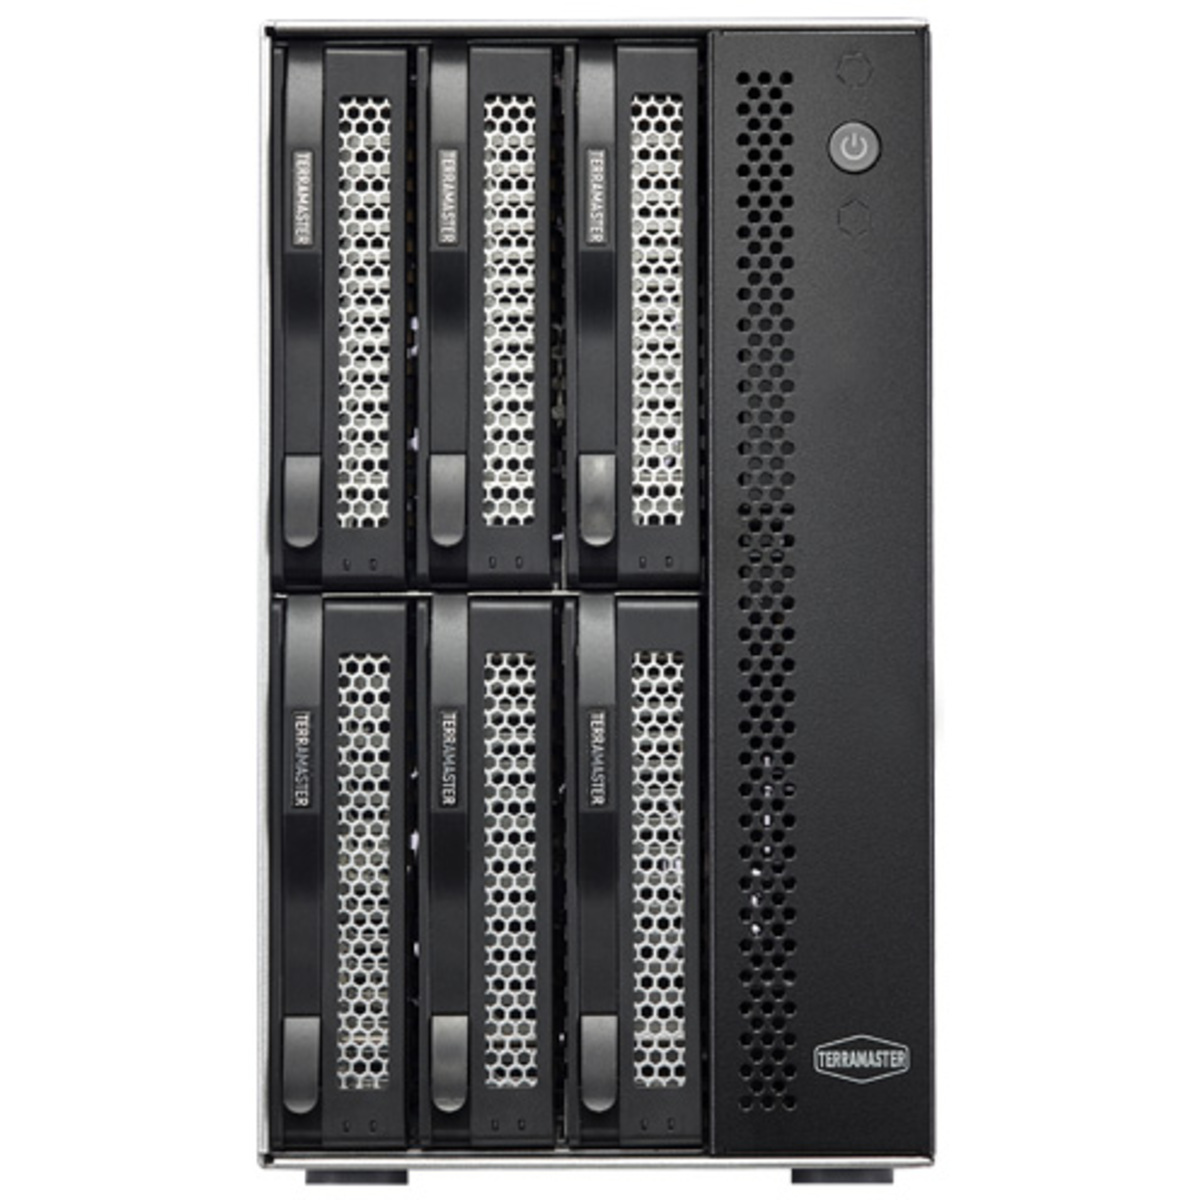 TerraMaster D6-320 36tb 6-Bay Desktop Multimedia / Power User / Business DAS - Direct Attached Storage Device 3x12tb Western Digital Red Plus WD120EFBX 3.5 7200rpm SATA 6Gb/s HDD NAS Class Drives Installed - Burn-In Tested D6-320